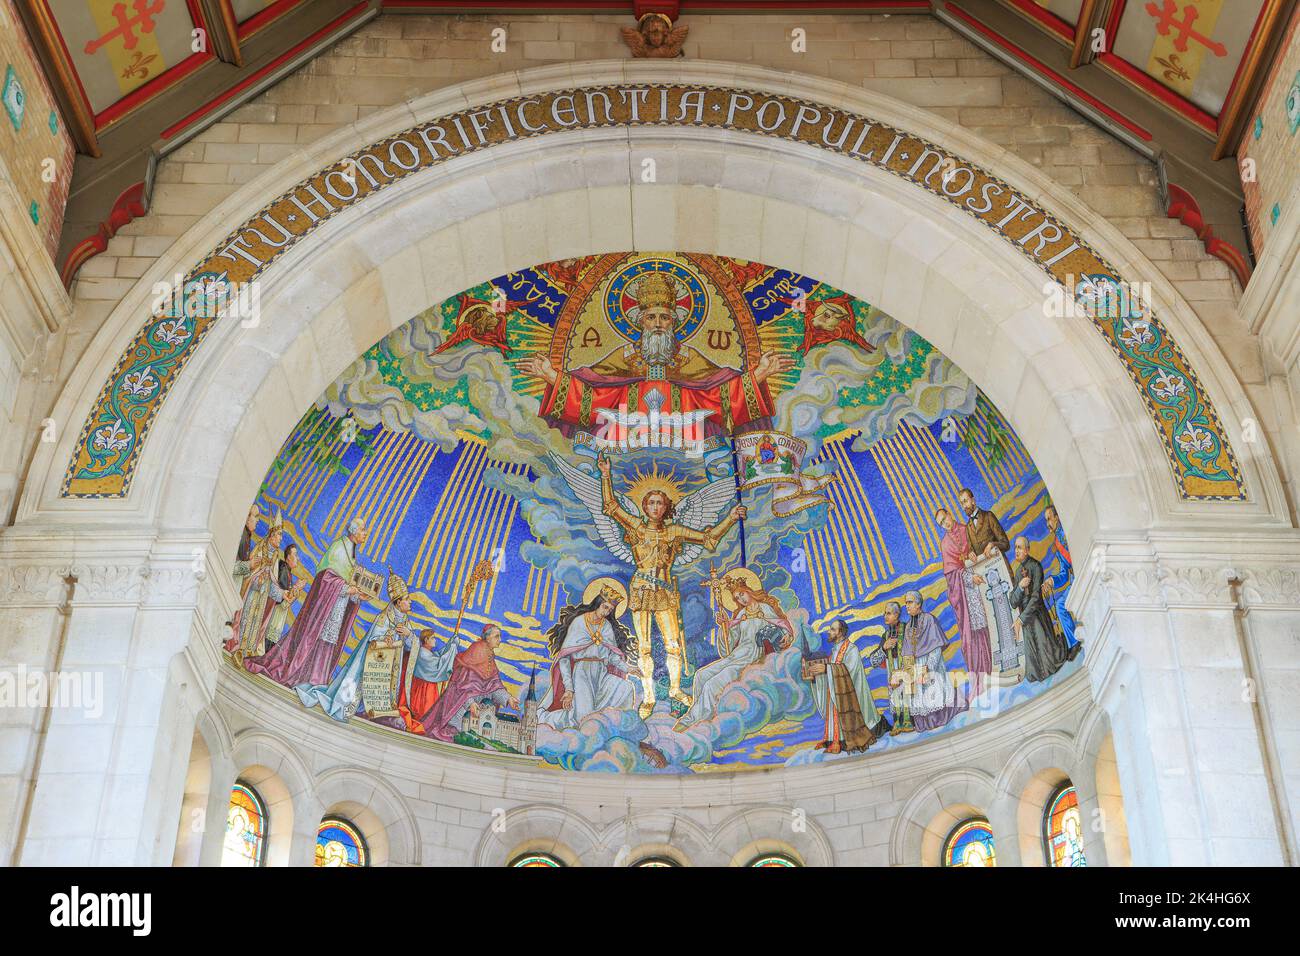 Ceiling mosaic showing Joan of Arc (1412-1431), patron saint of France, at the basilica of Bois-Chenu in Domrémy-la-Pucelle (Vosges), France Stock Photo